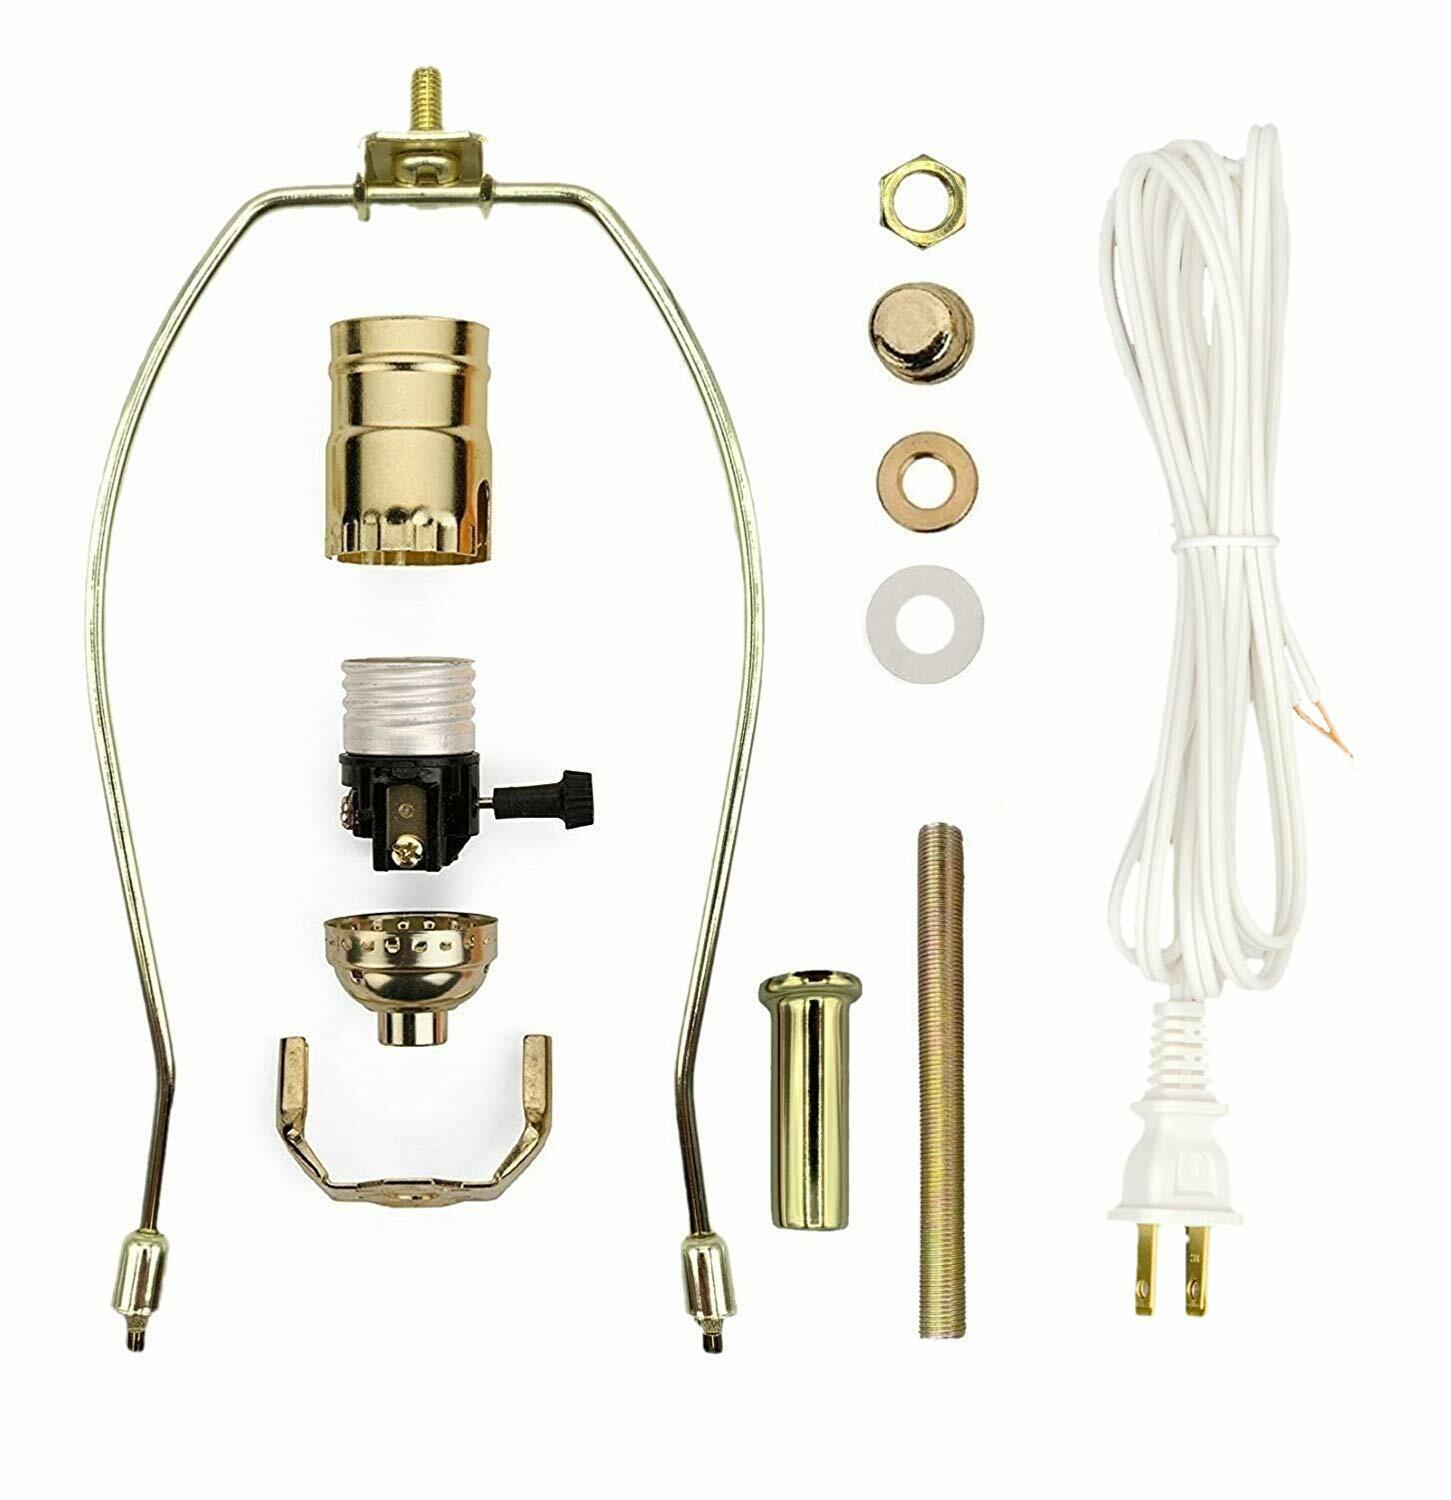 Creative Hobbies Make-A-Lamp Kit #ML3-12S Complete Lamp Parts Kit $ Instructions